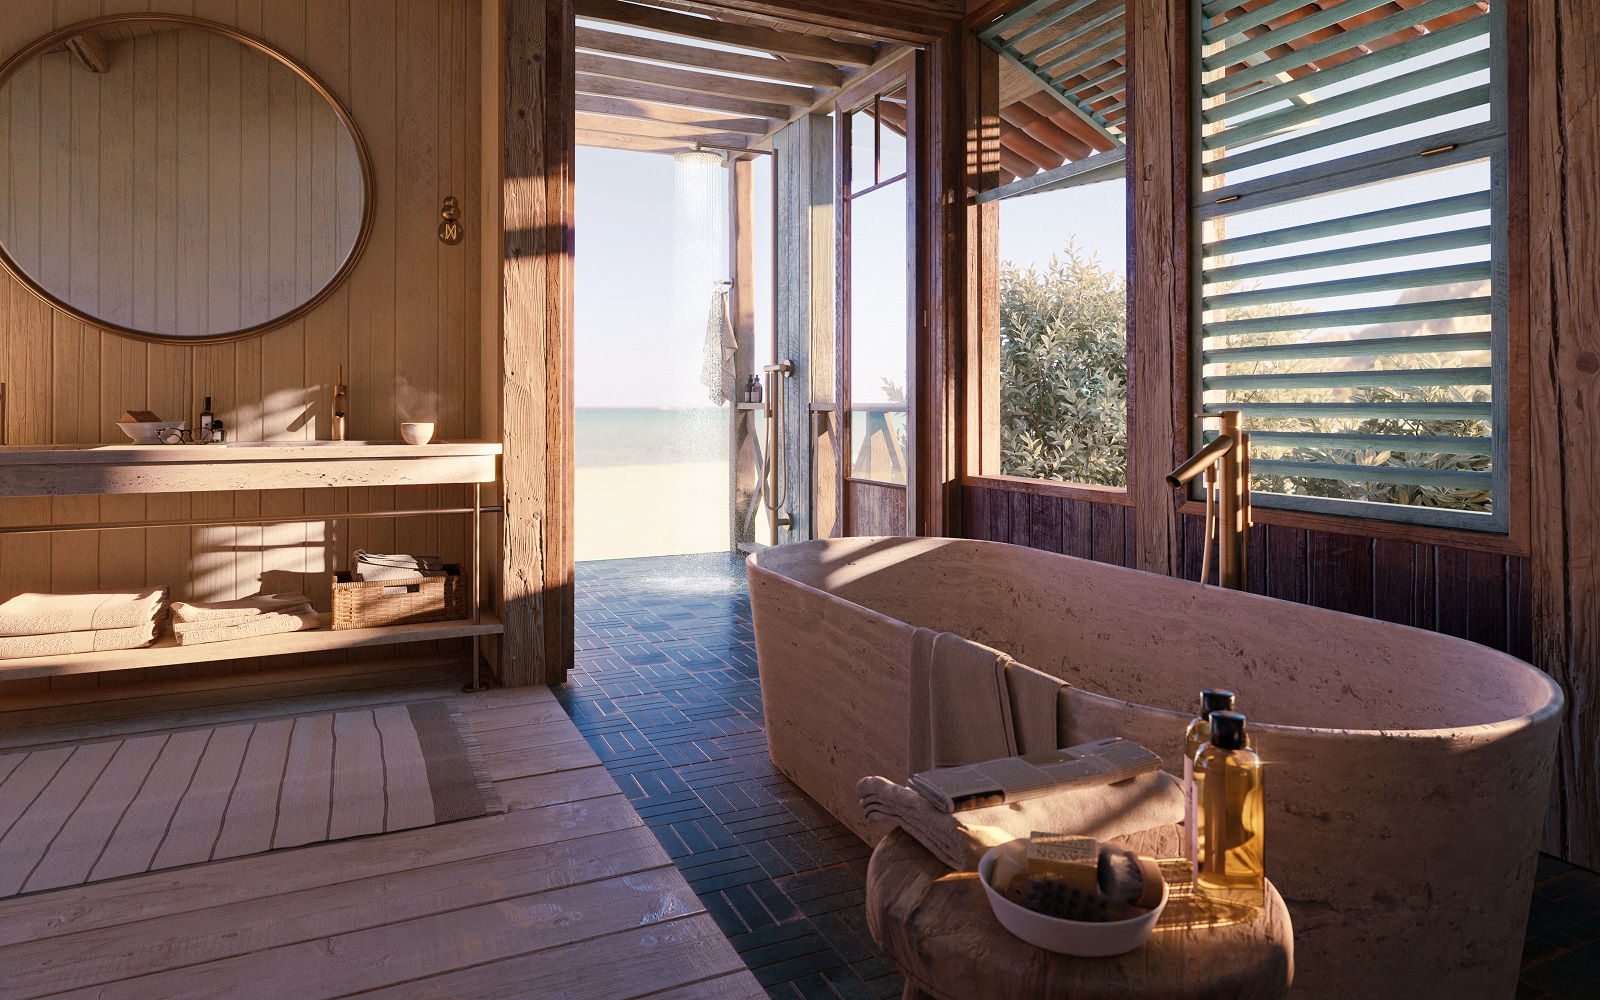 freestanding bath with windows and doors open onto deck and outdoors